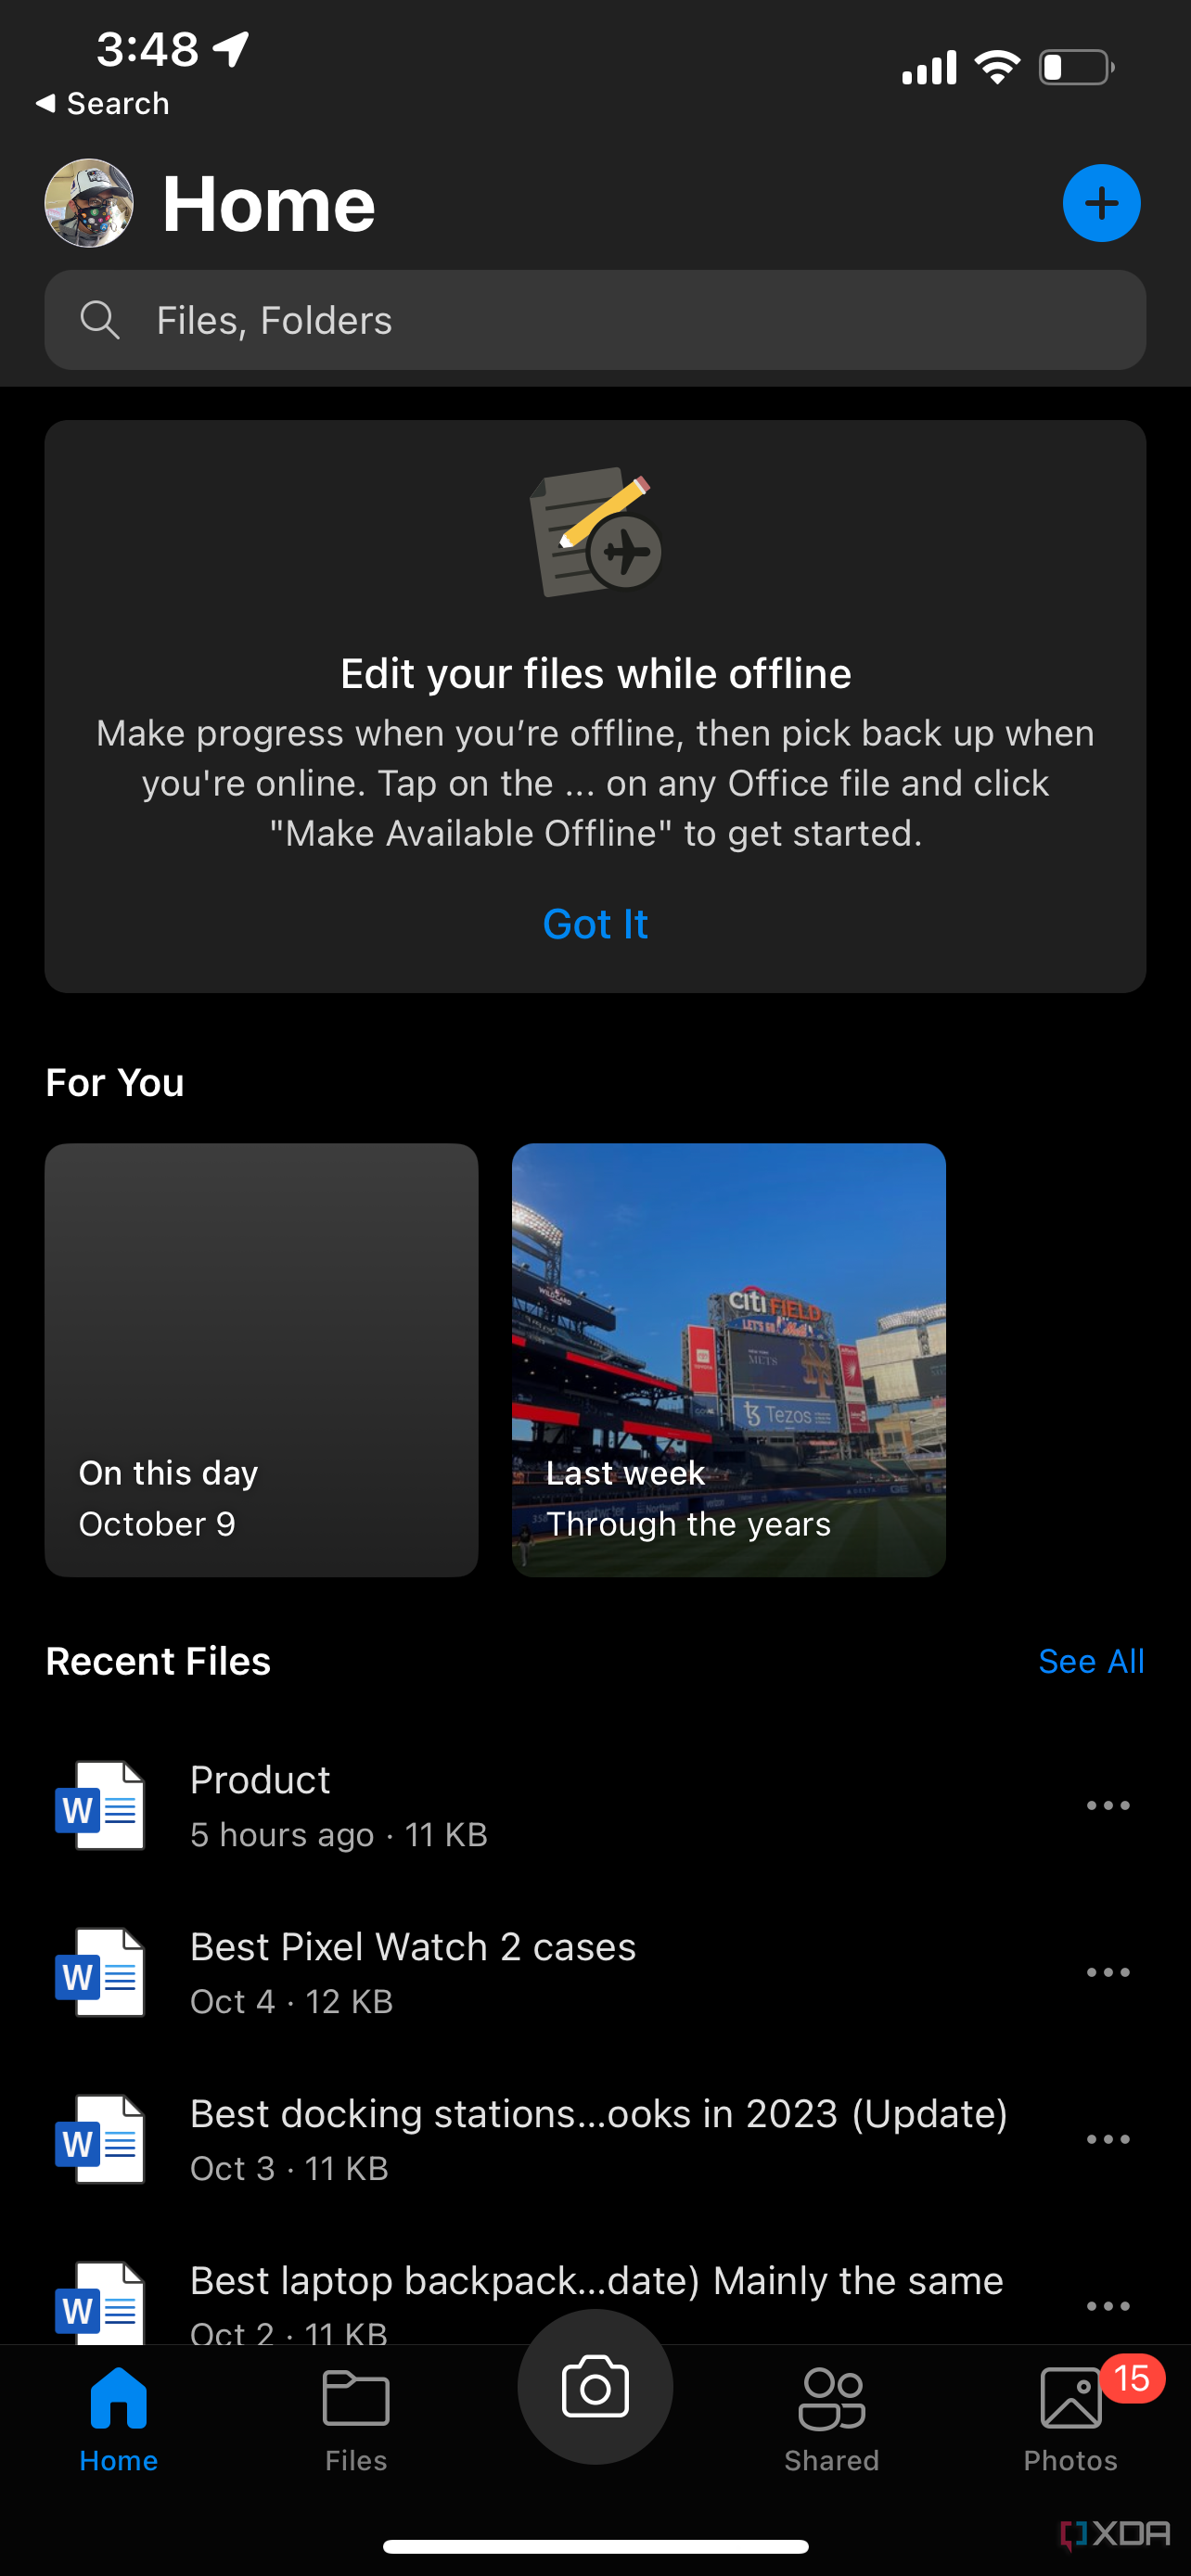 The main page in the OneDrive app on an iPhone